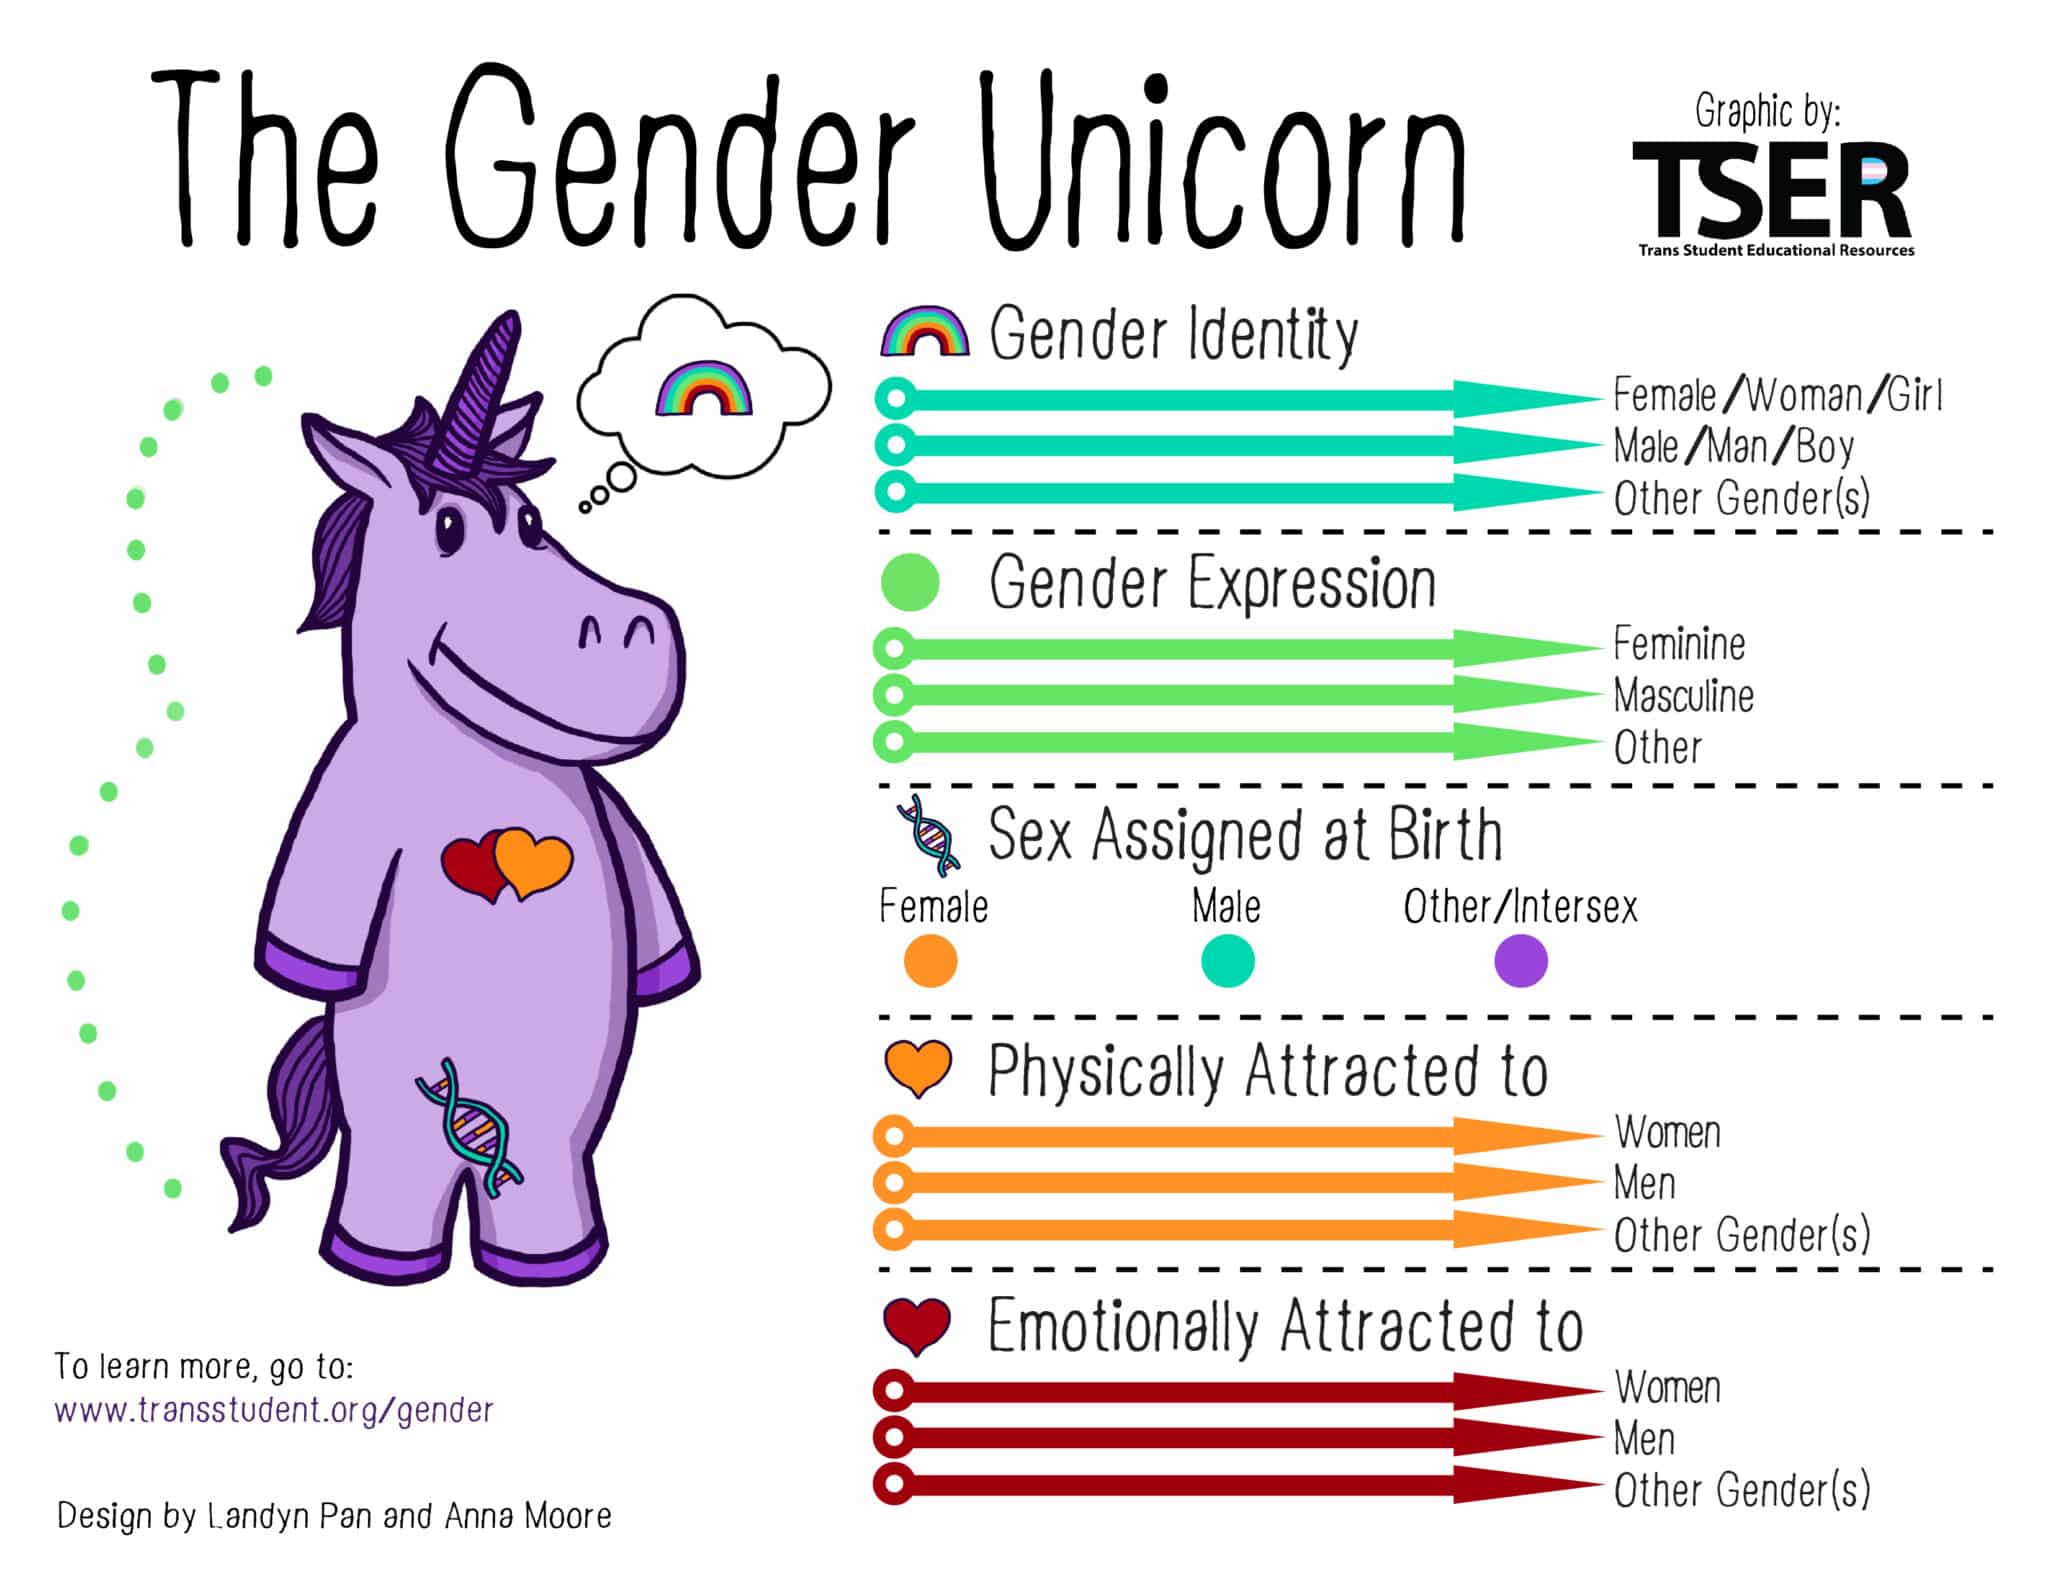 TSER's The Gender Unicorn Graphic - explaining the differences between gender identity, expression, sex assigned at birth, and physical vs emotional attraction.